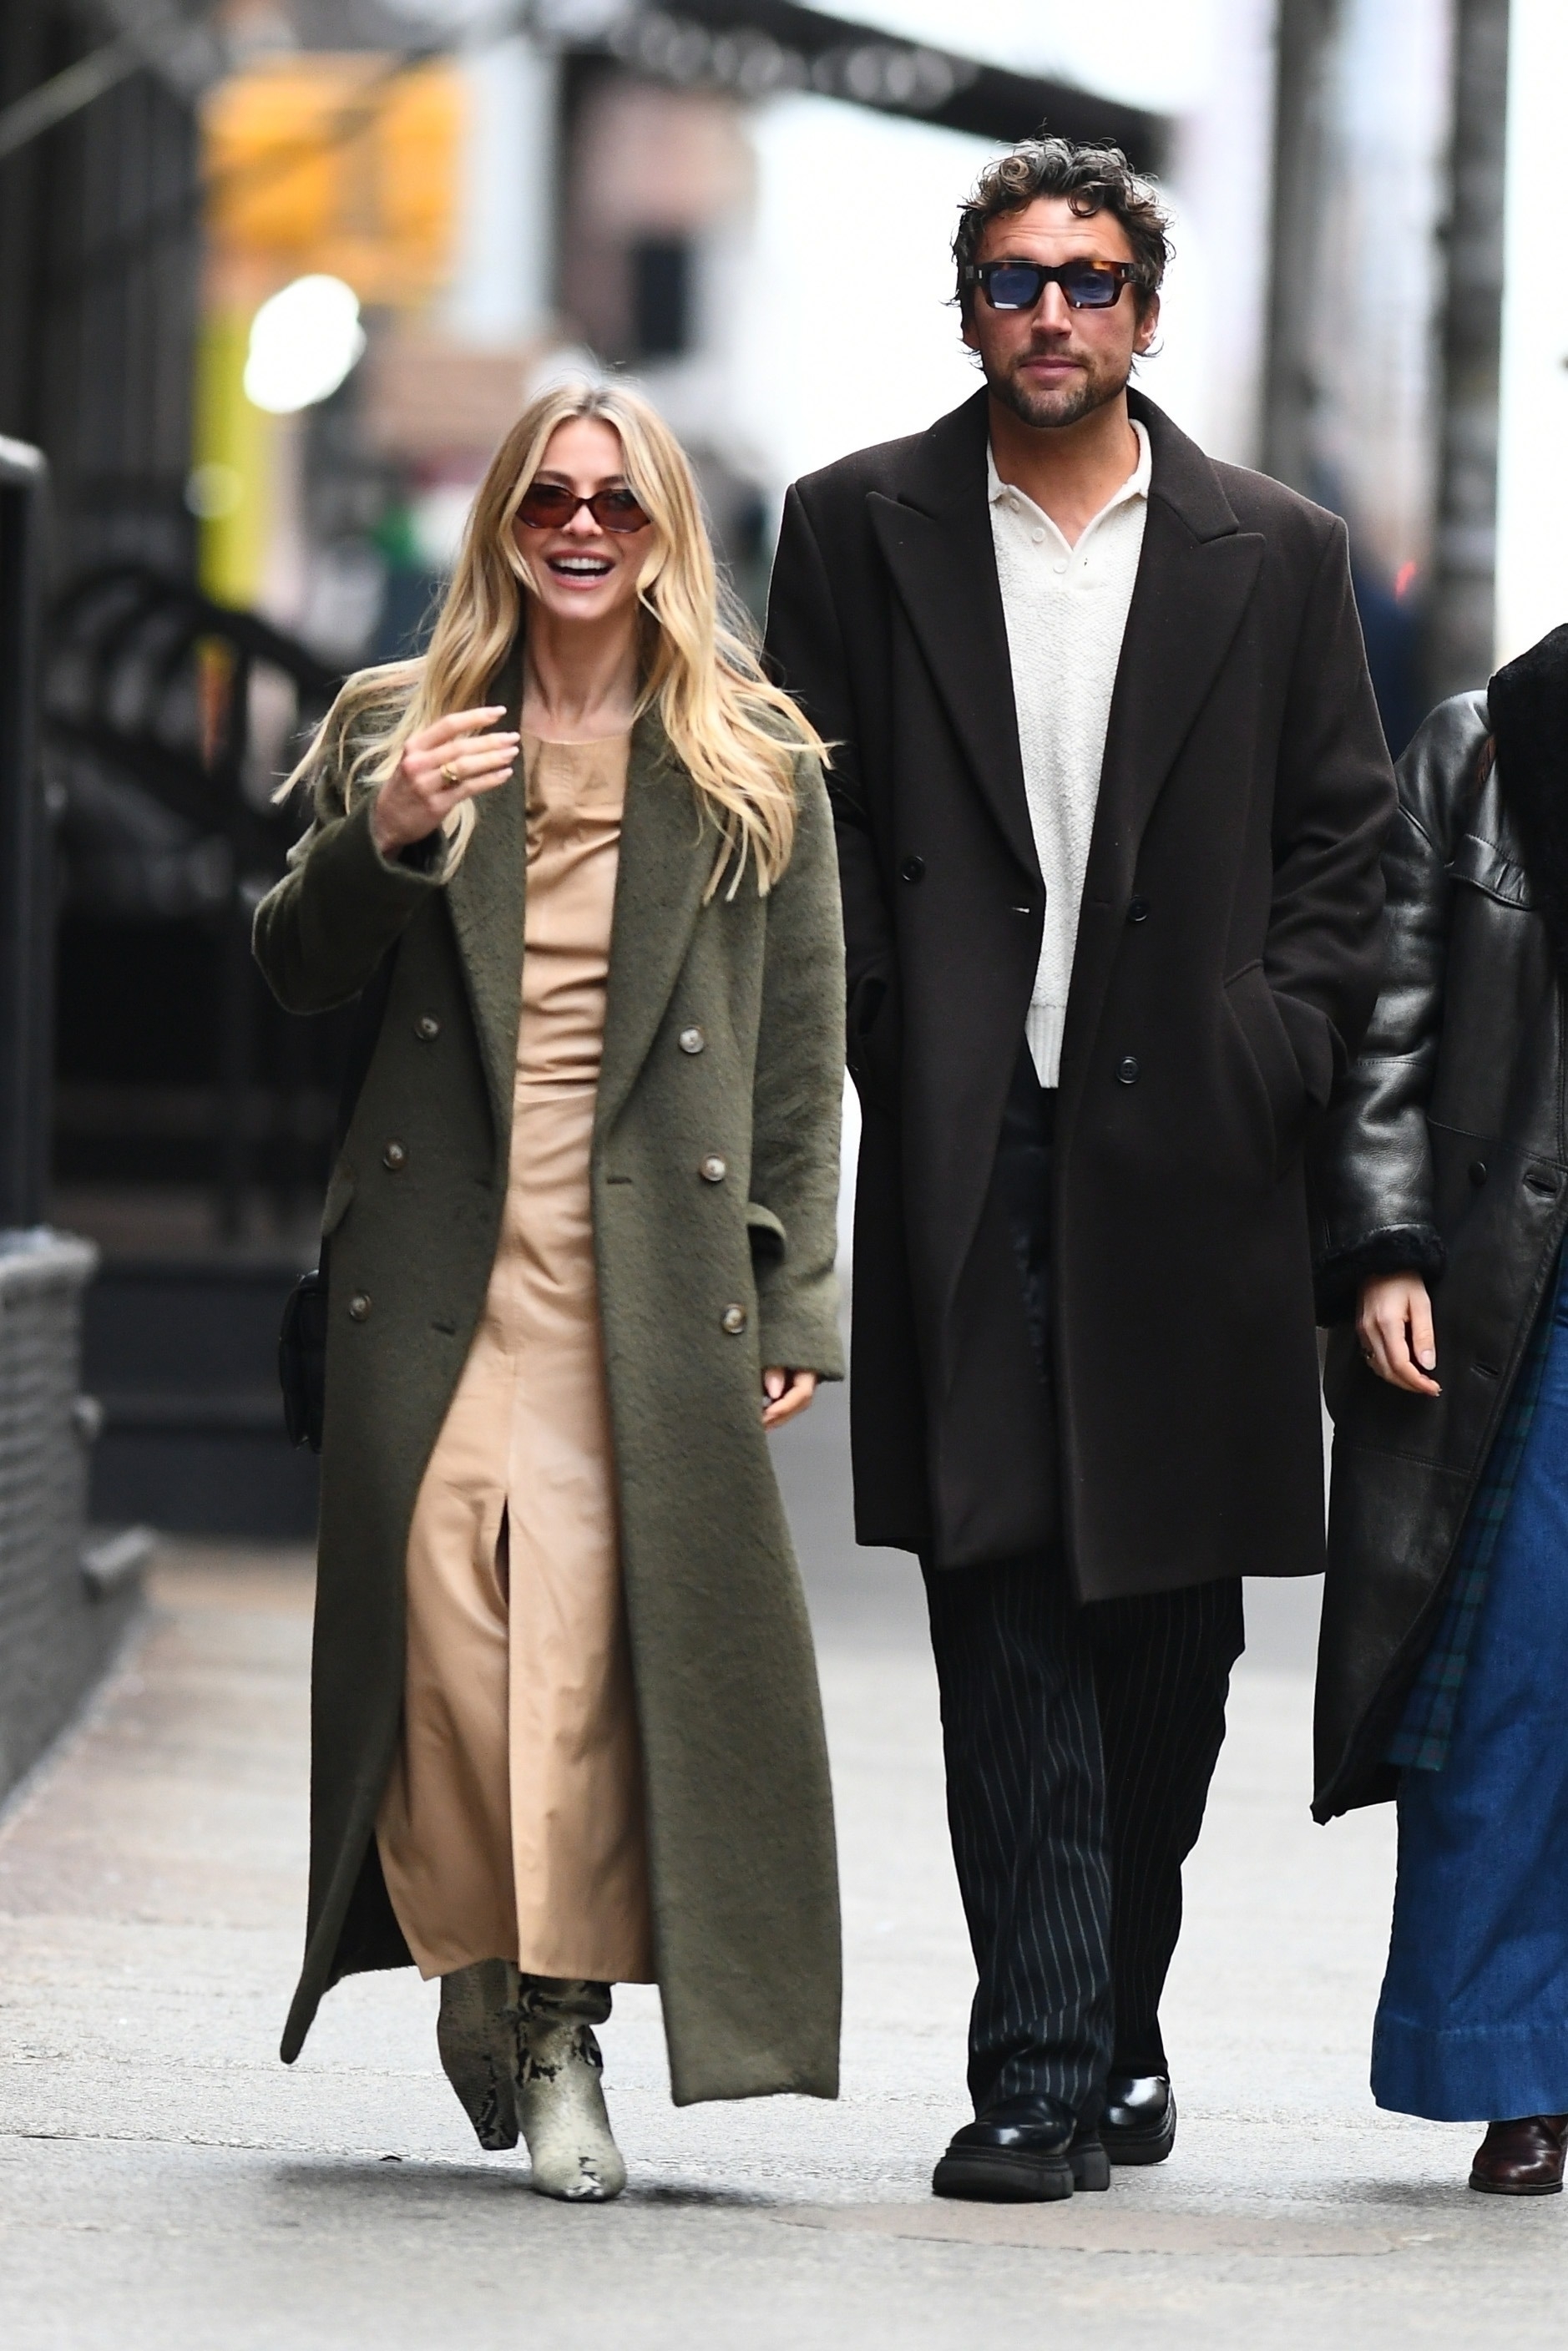 The DWTS host was seen flaunting her winter wardrobe in an olive green overcoat and ankle-length, high-slit tan dress